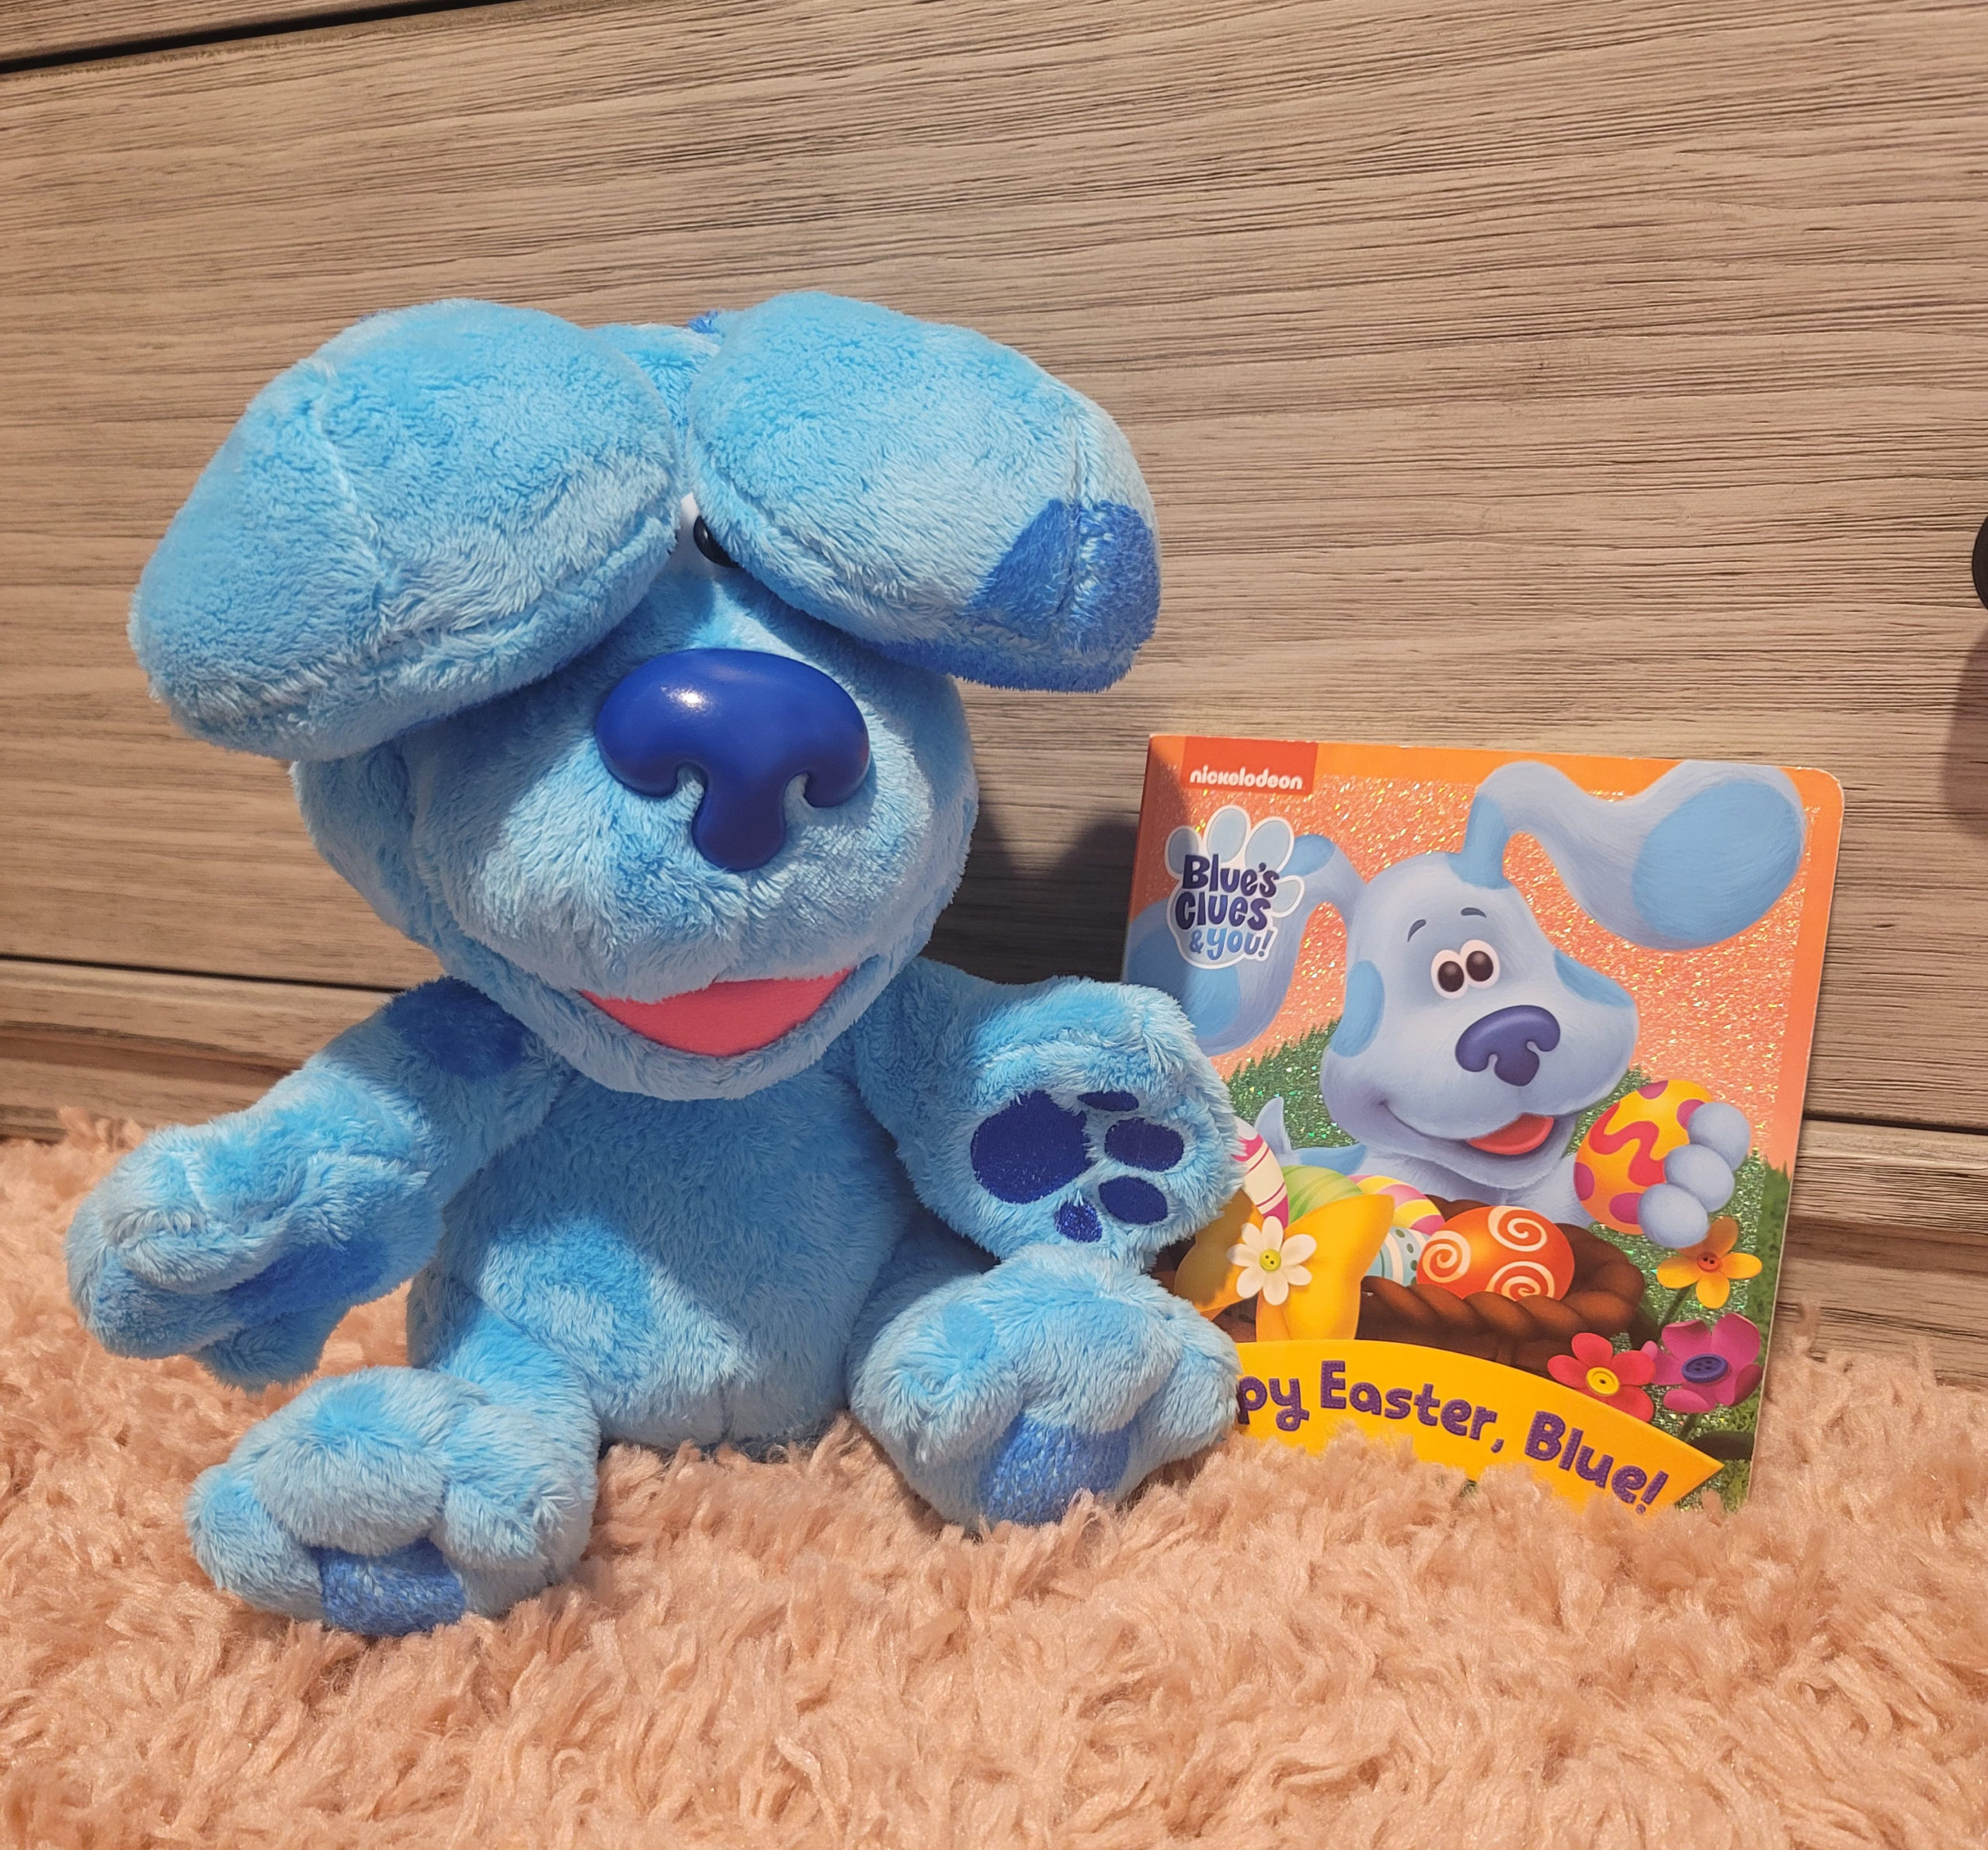 Blue's Clues stuffed animal and book